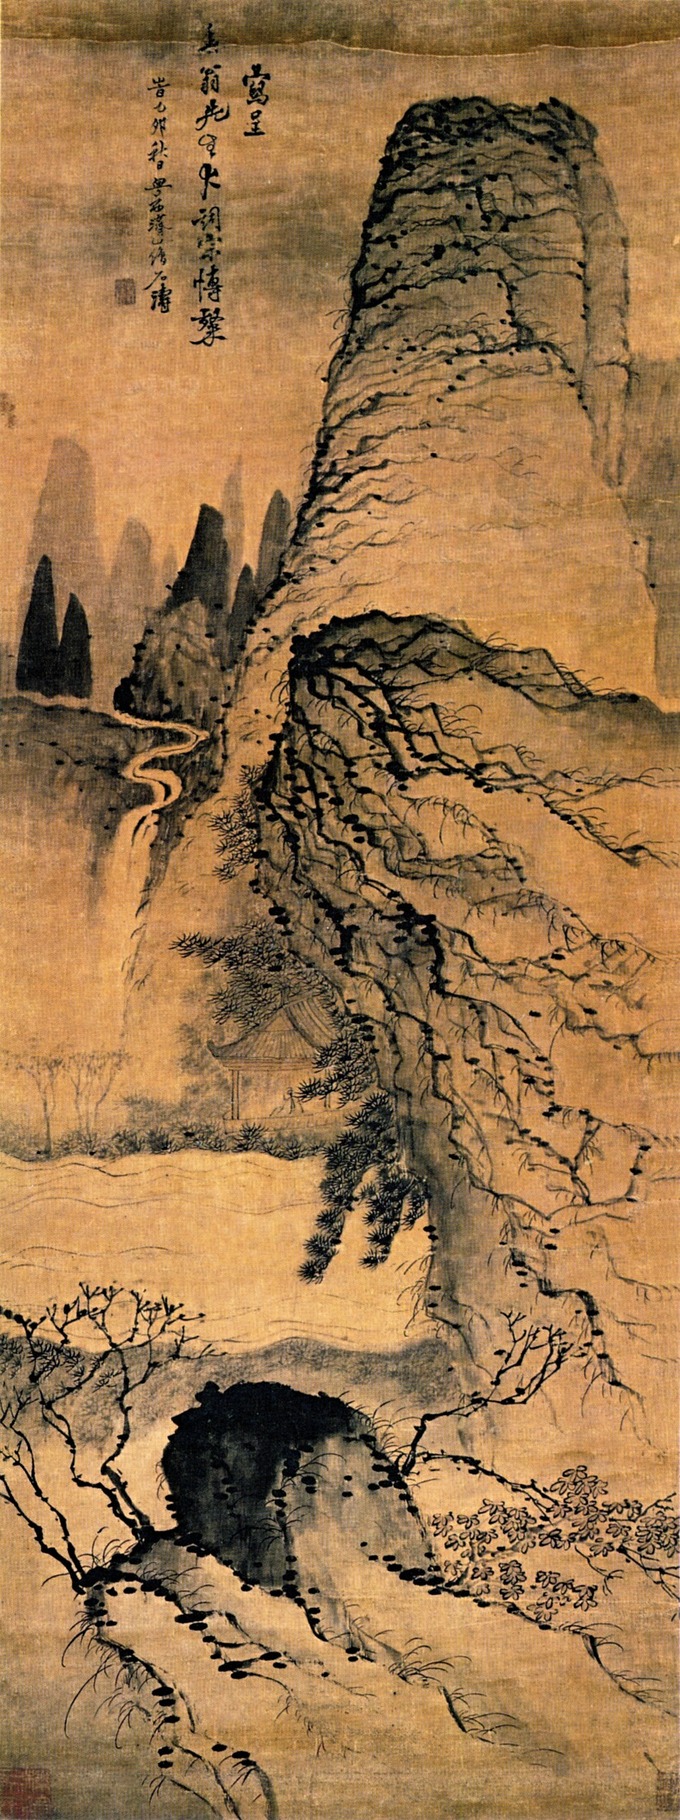 Painting depicts a tall, craggy peak overlooking a pavilion alongside a river. More peaks and a waterfall are in the background.